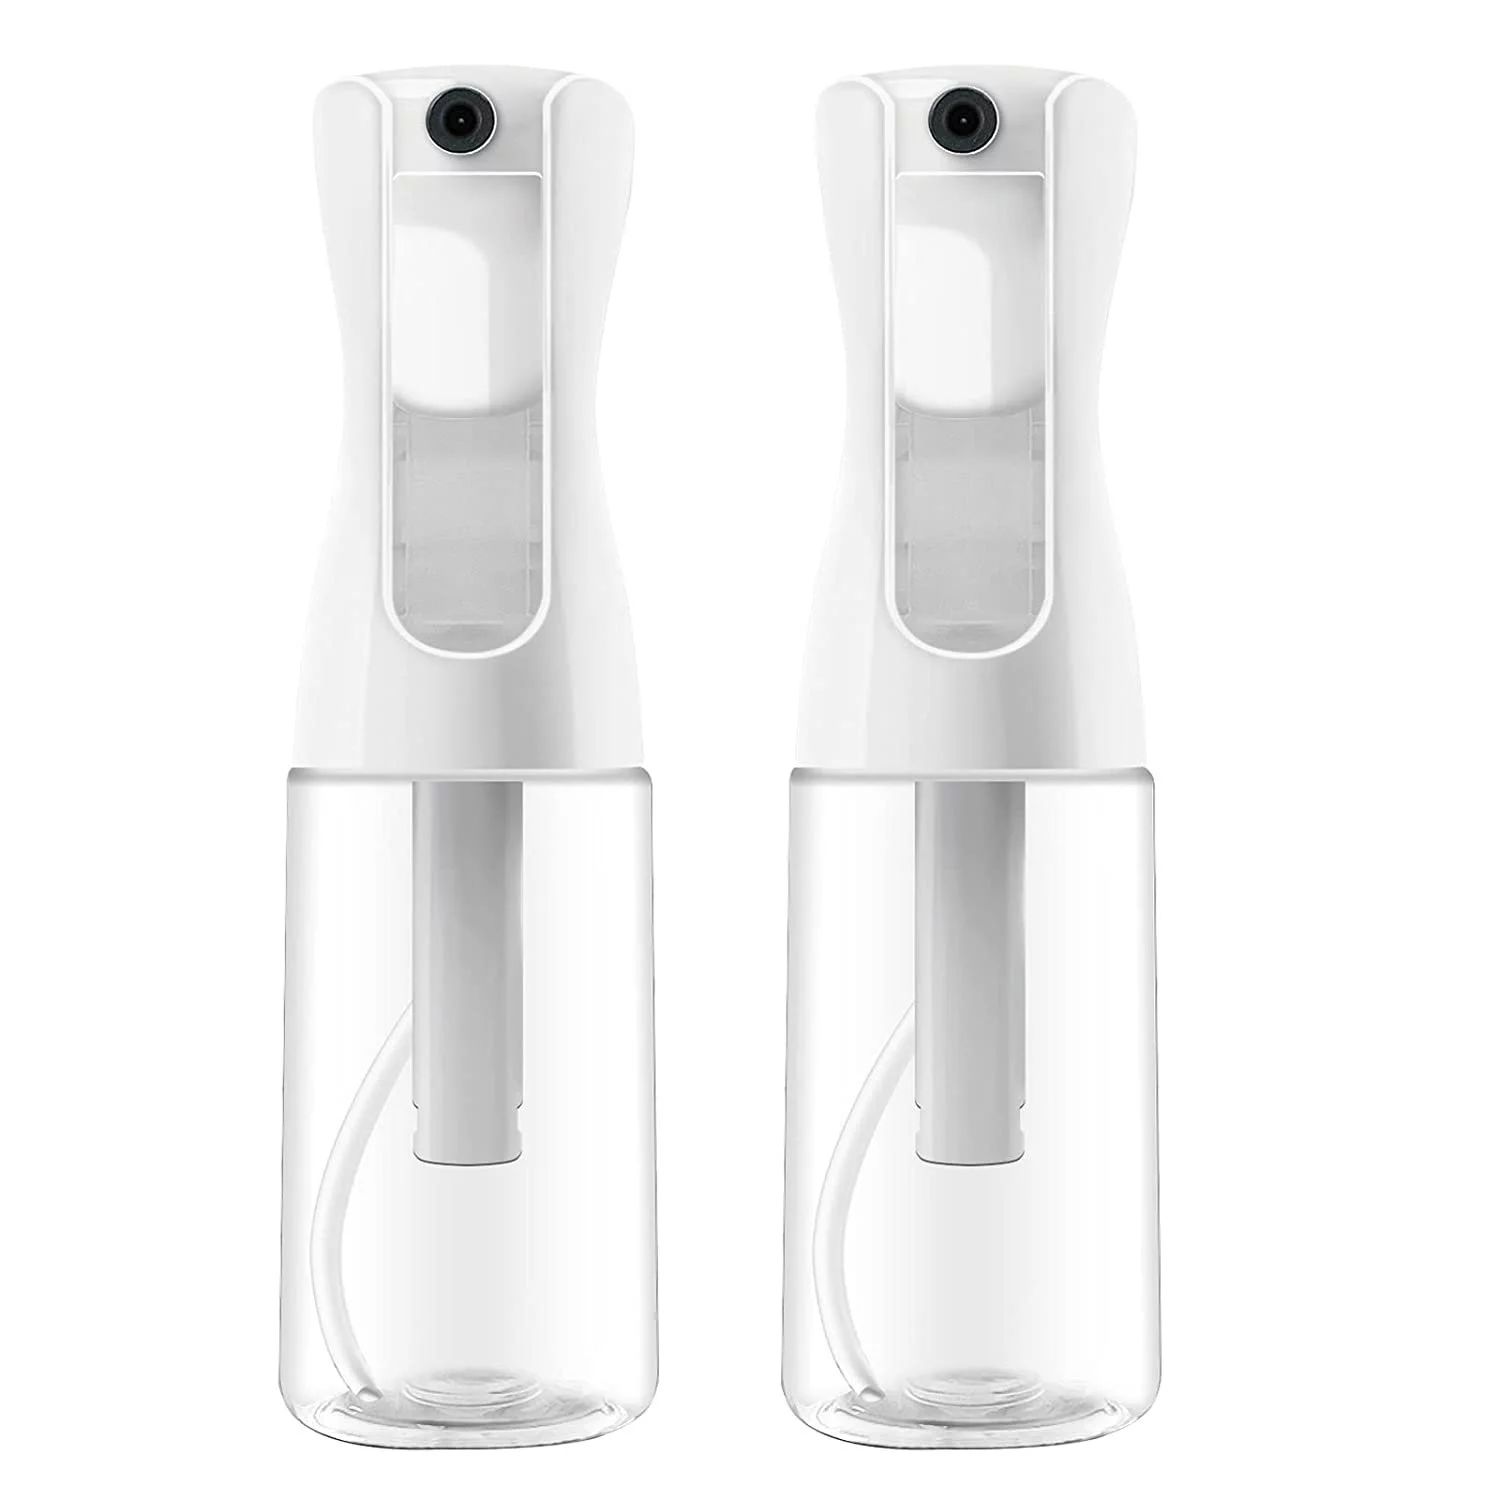 2 Pack Continuous Mist Empty Spray Bottle For Hair, 5 Oz - Salon Quality 360 Water Misting Spraye... | Walmart (US)